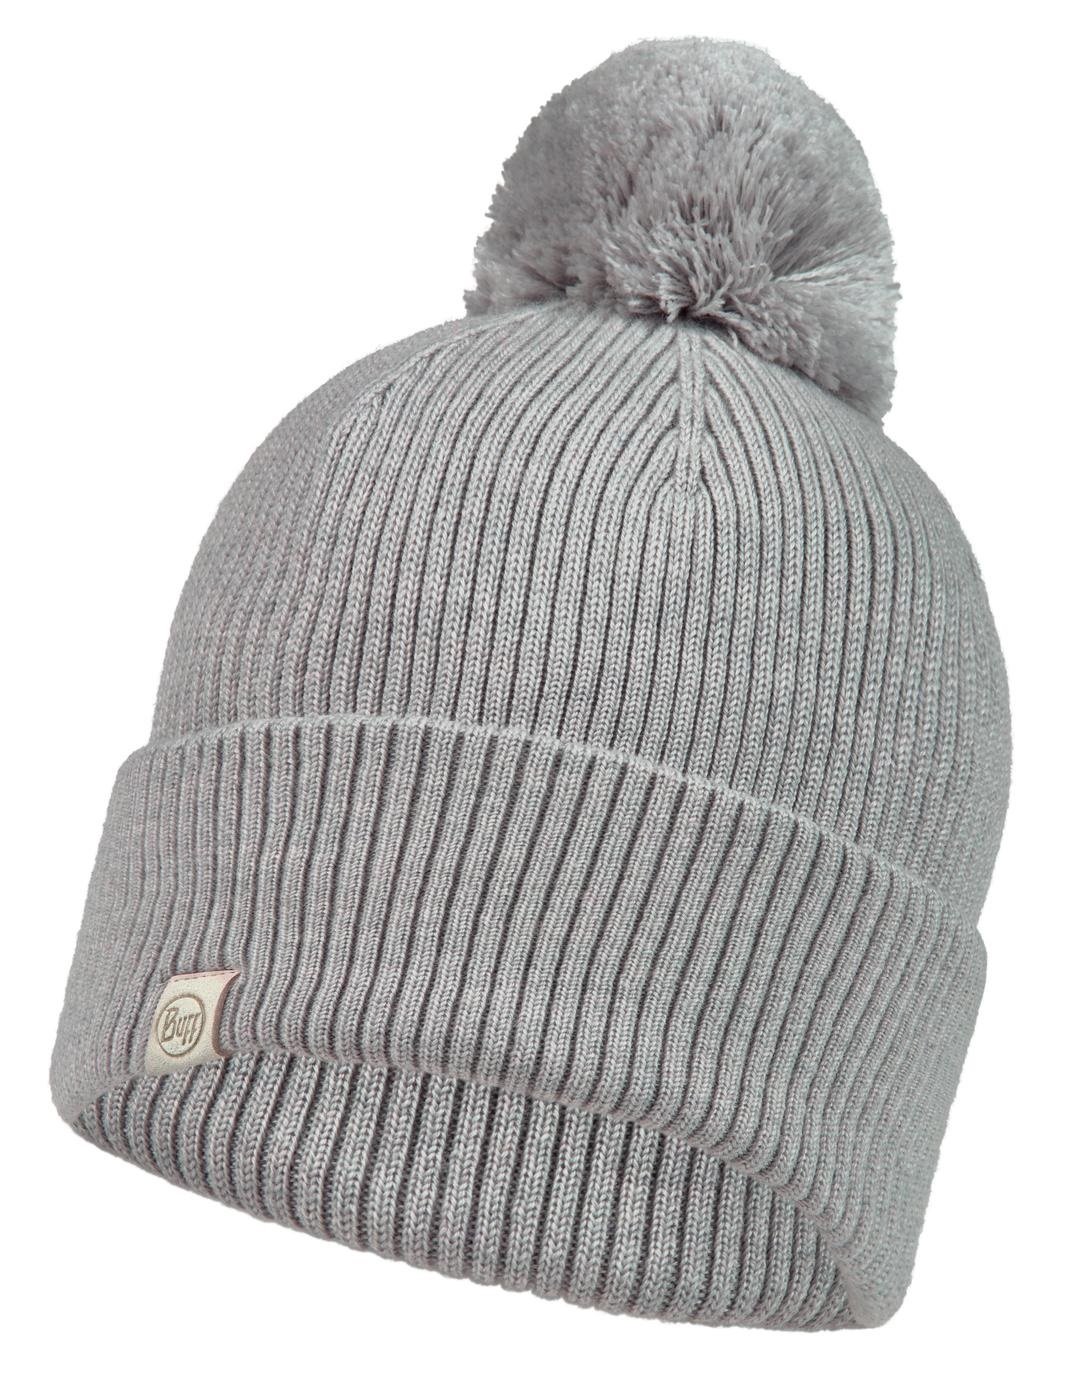 Шапка Buff Knitted Hat Tim Light Grey US:One size, 126463.933.10.00 шапка buff crossknit hat sold lihgt grey us one size 126483 933 10 00